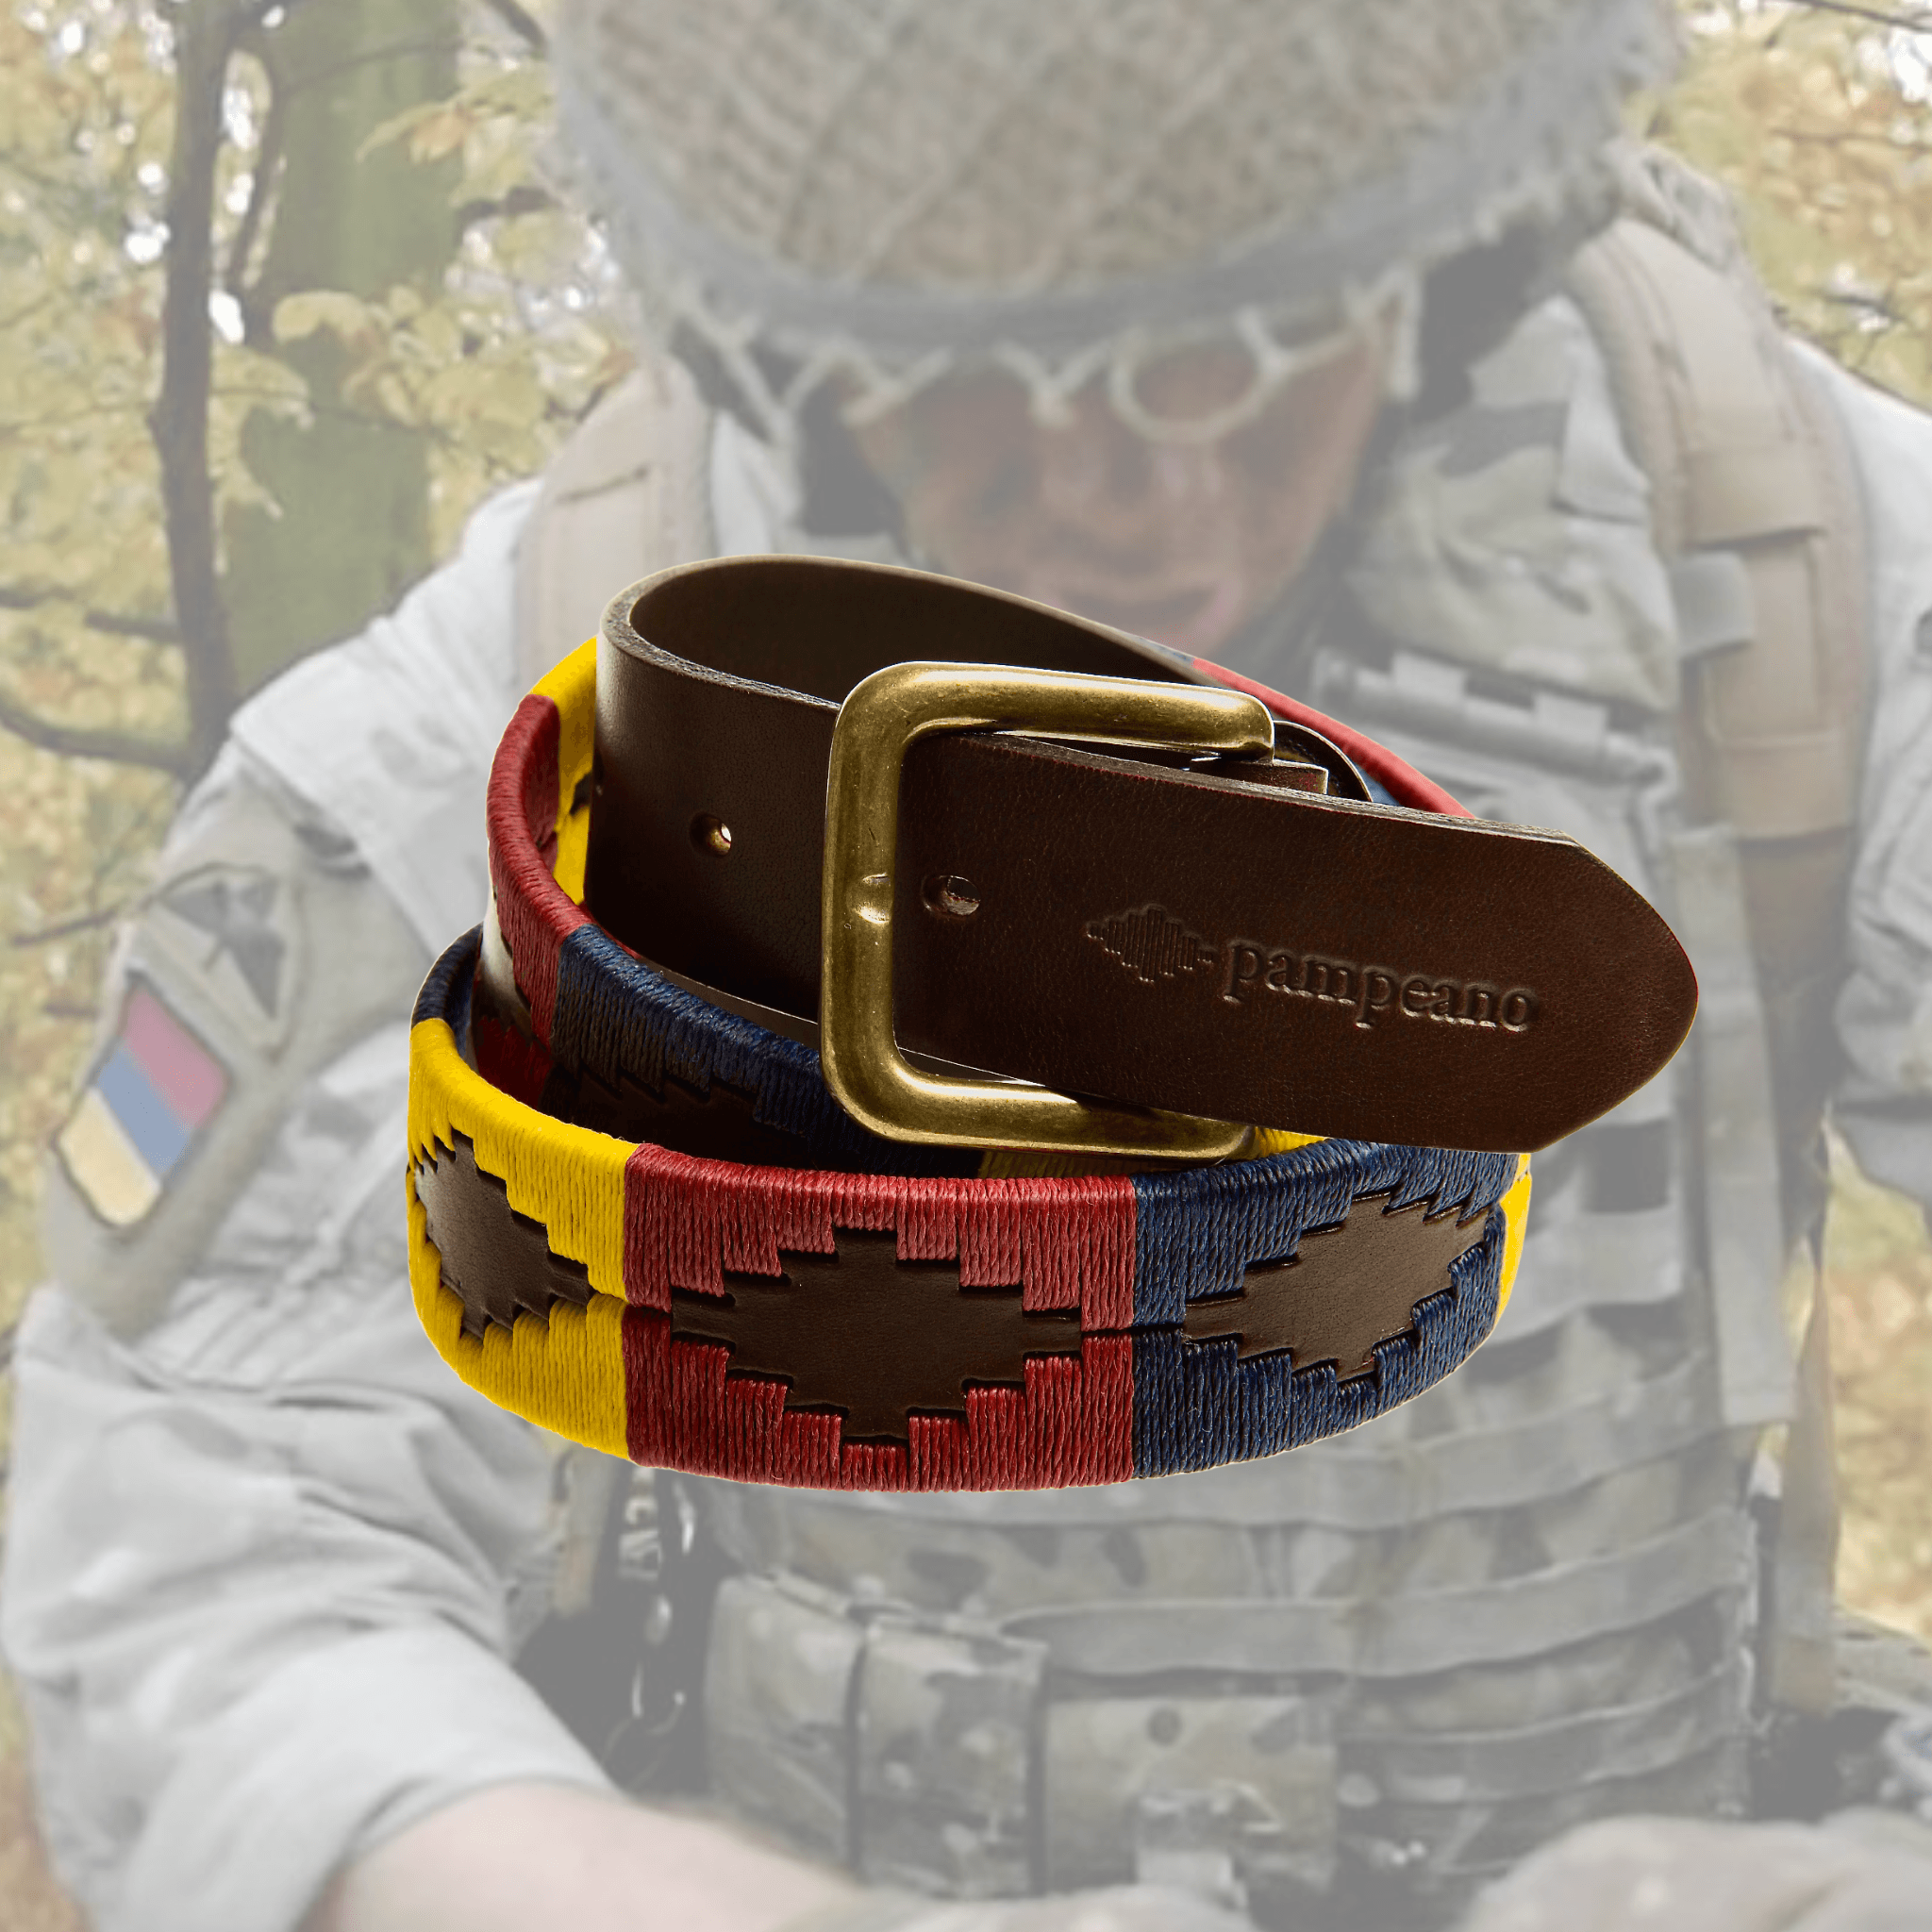 The Country Direct & Pampeano Royal Army Medical Corps Leather Polo Belt.